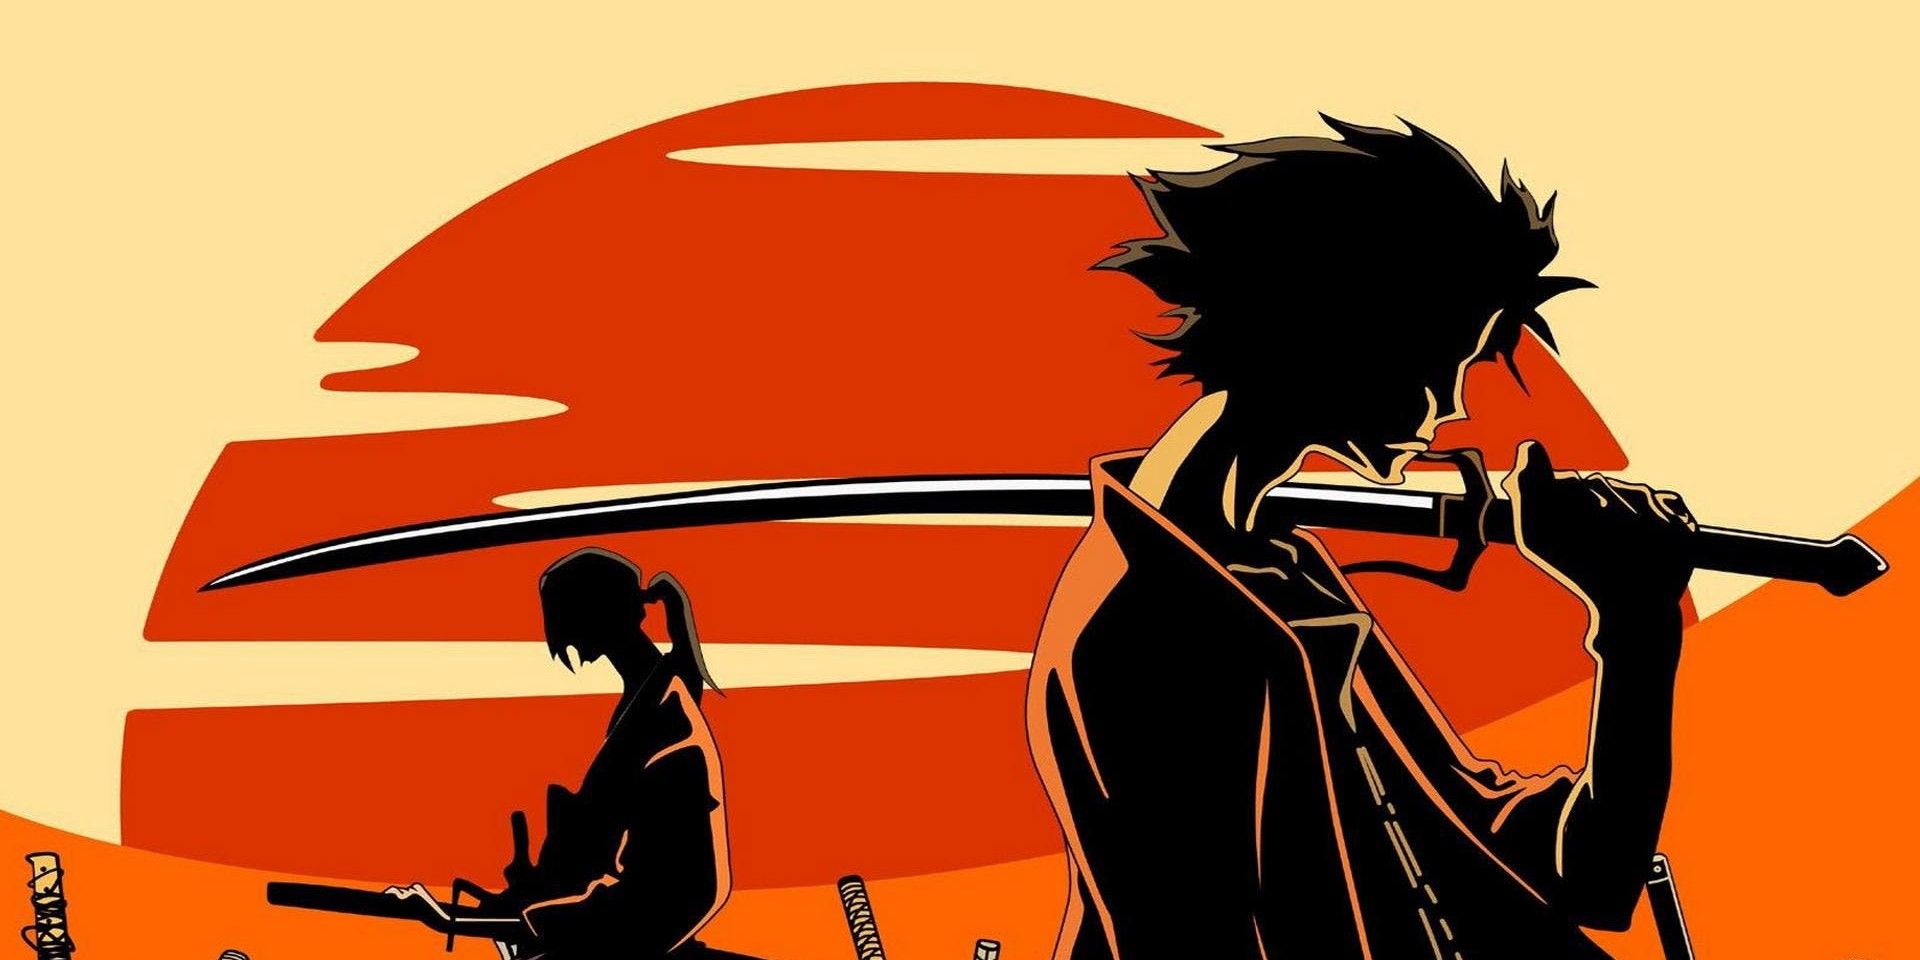 two of the main characters from the show samurai champloo silhouetted against a red setting sun